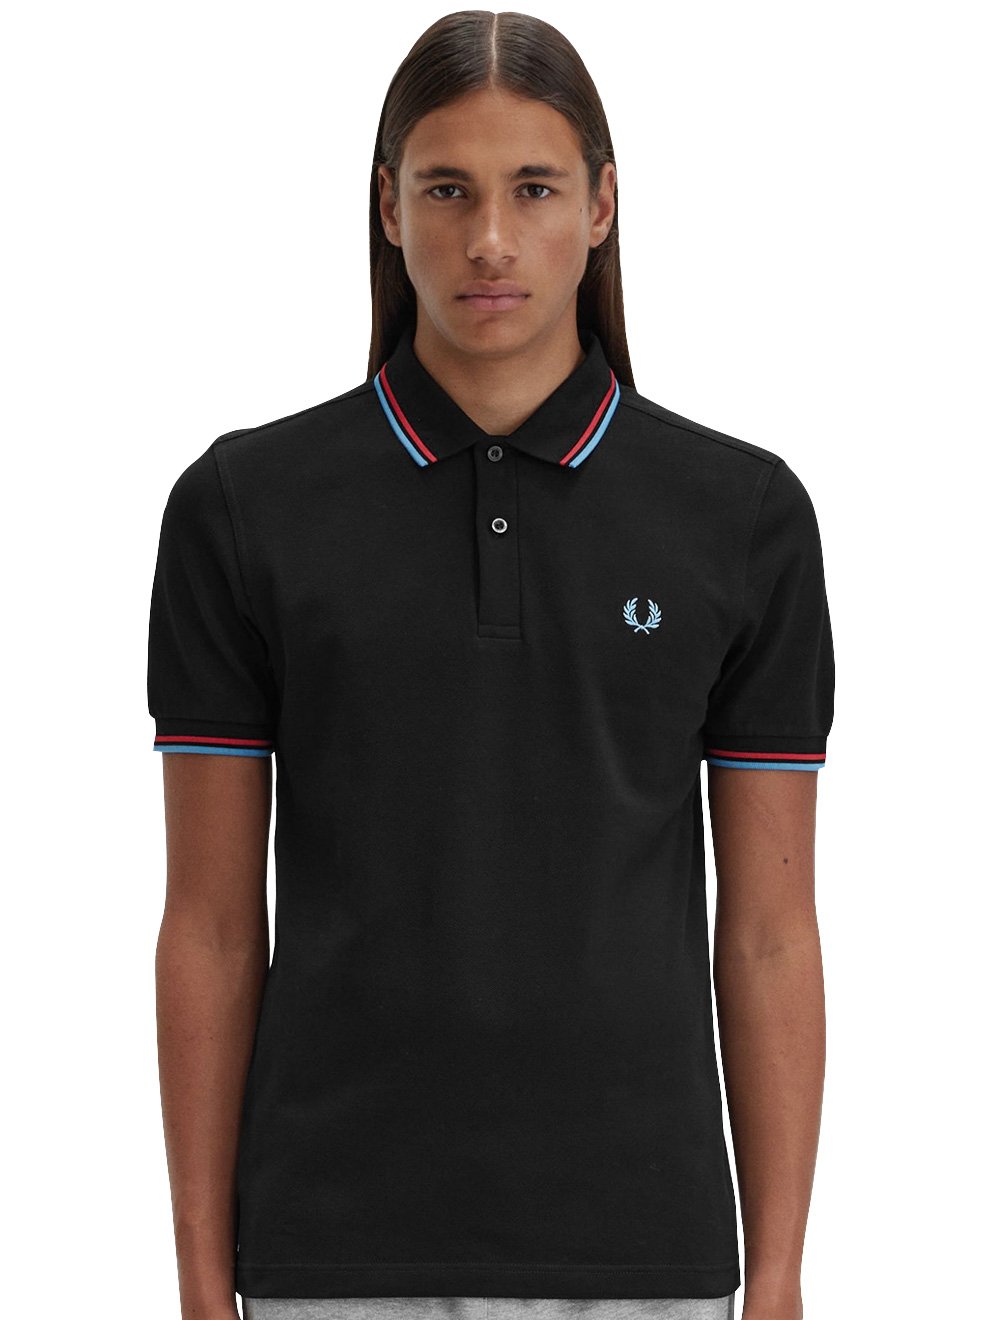 Polo Fred Perry Masculina Piquet Regular Red Blue Twin Tipped Preta